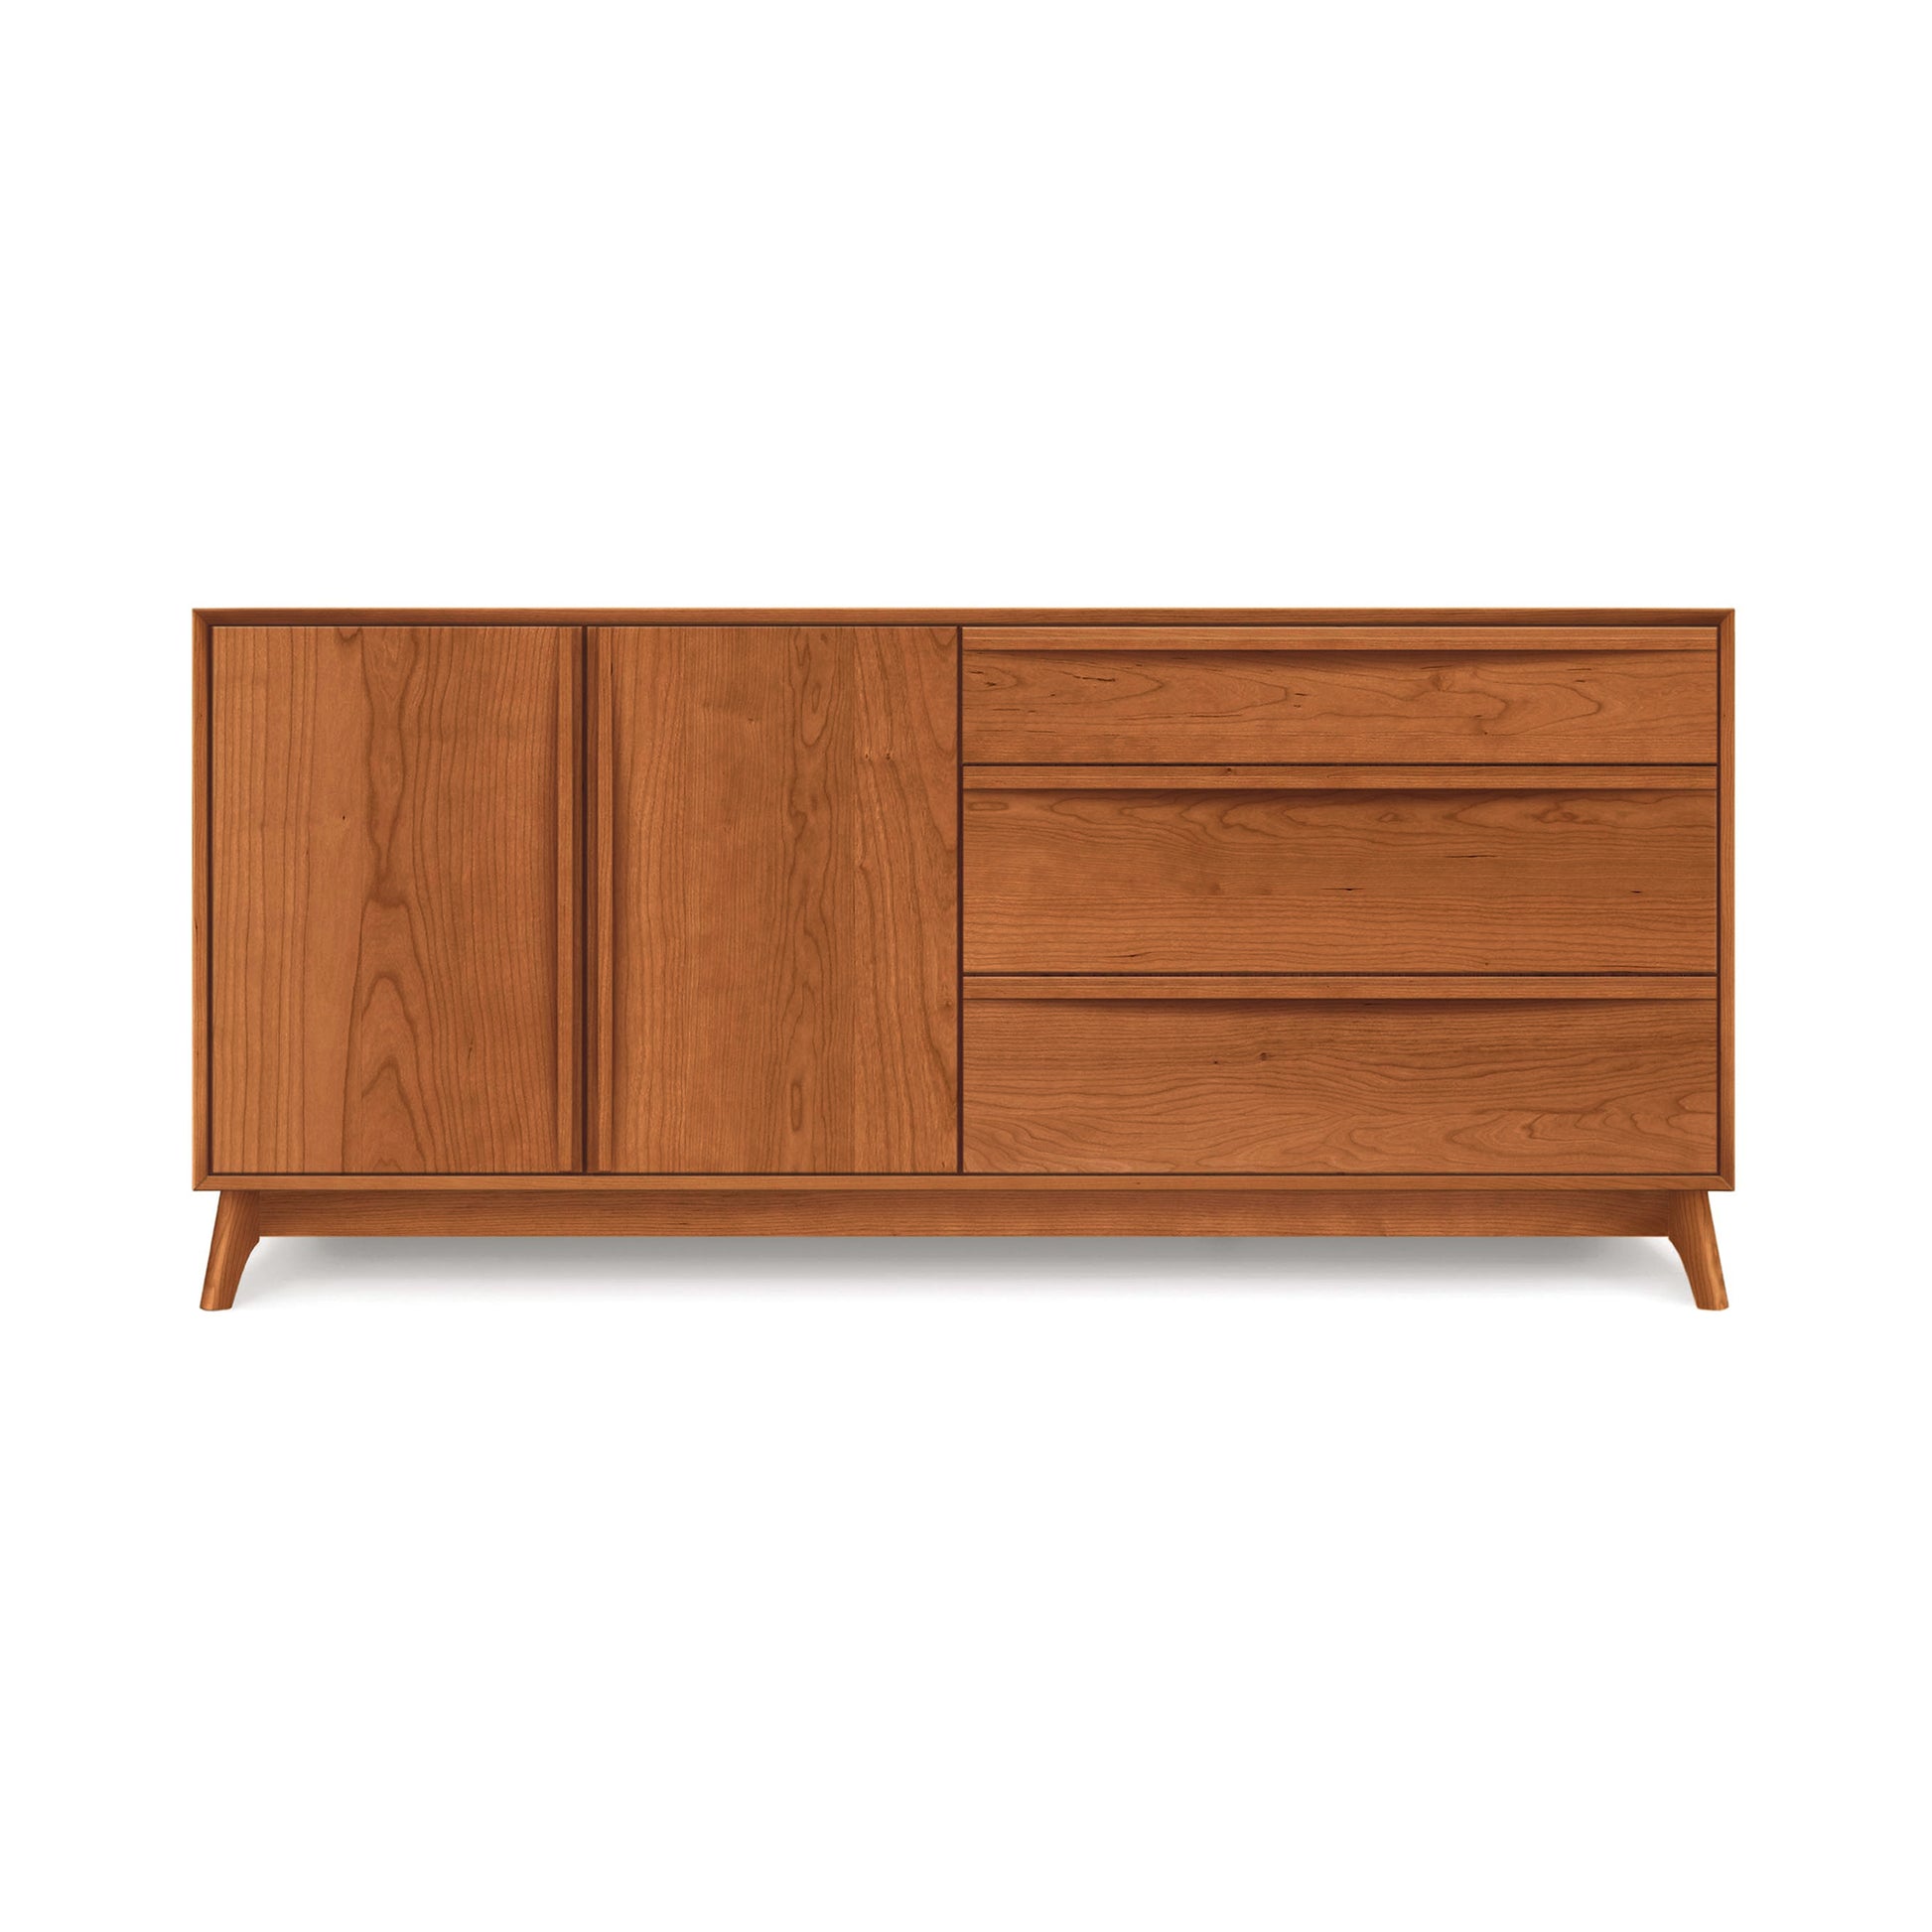 Mid-century modern Copeland Furniture Catalina 3-Drawers, 2-Door Buffet with drawers and cupboard space, isolated on a white background.